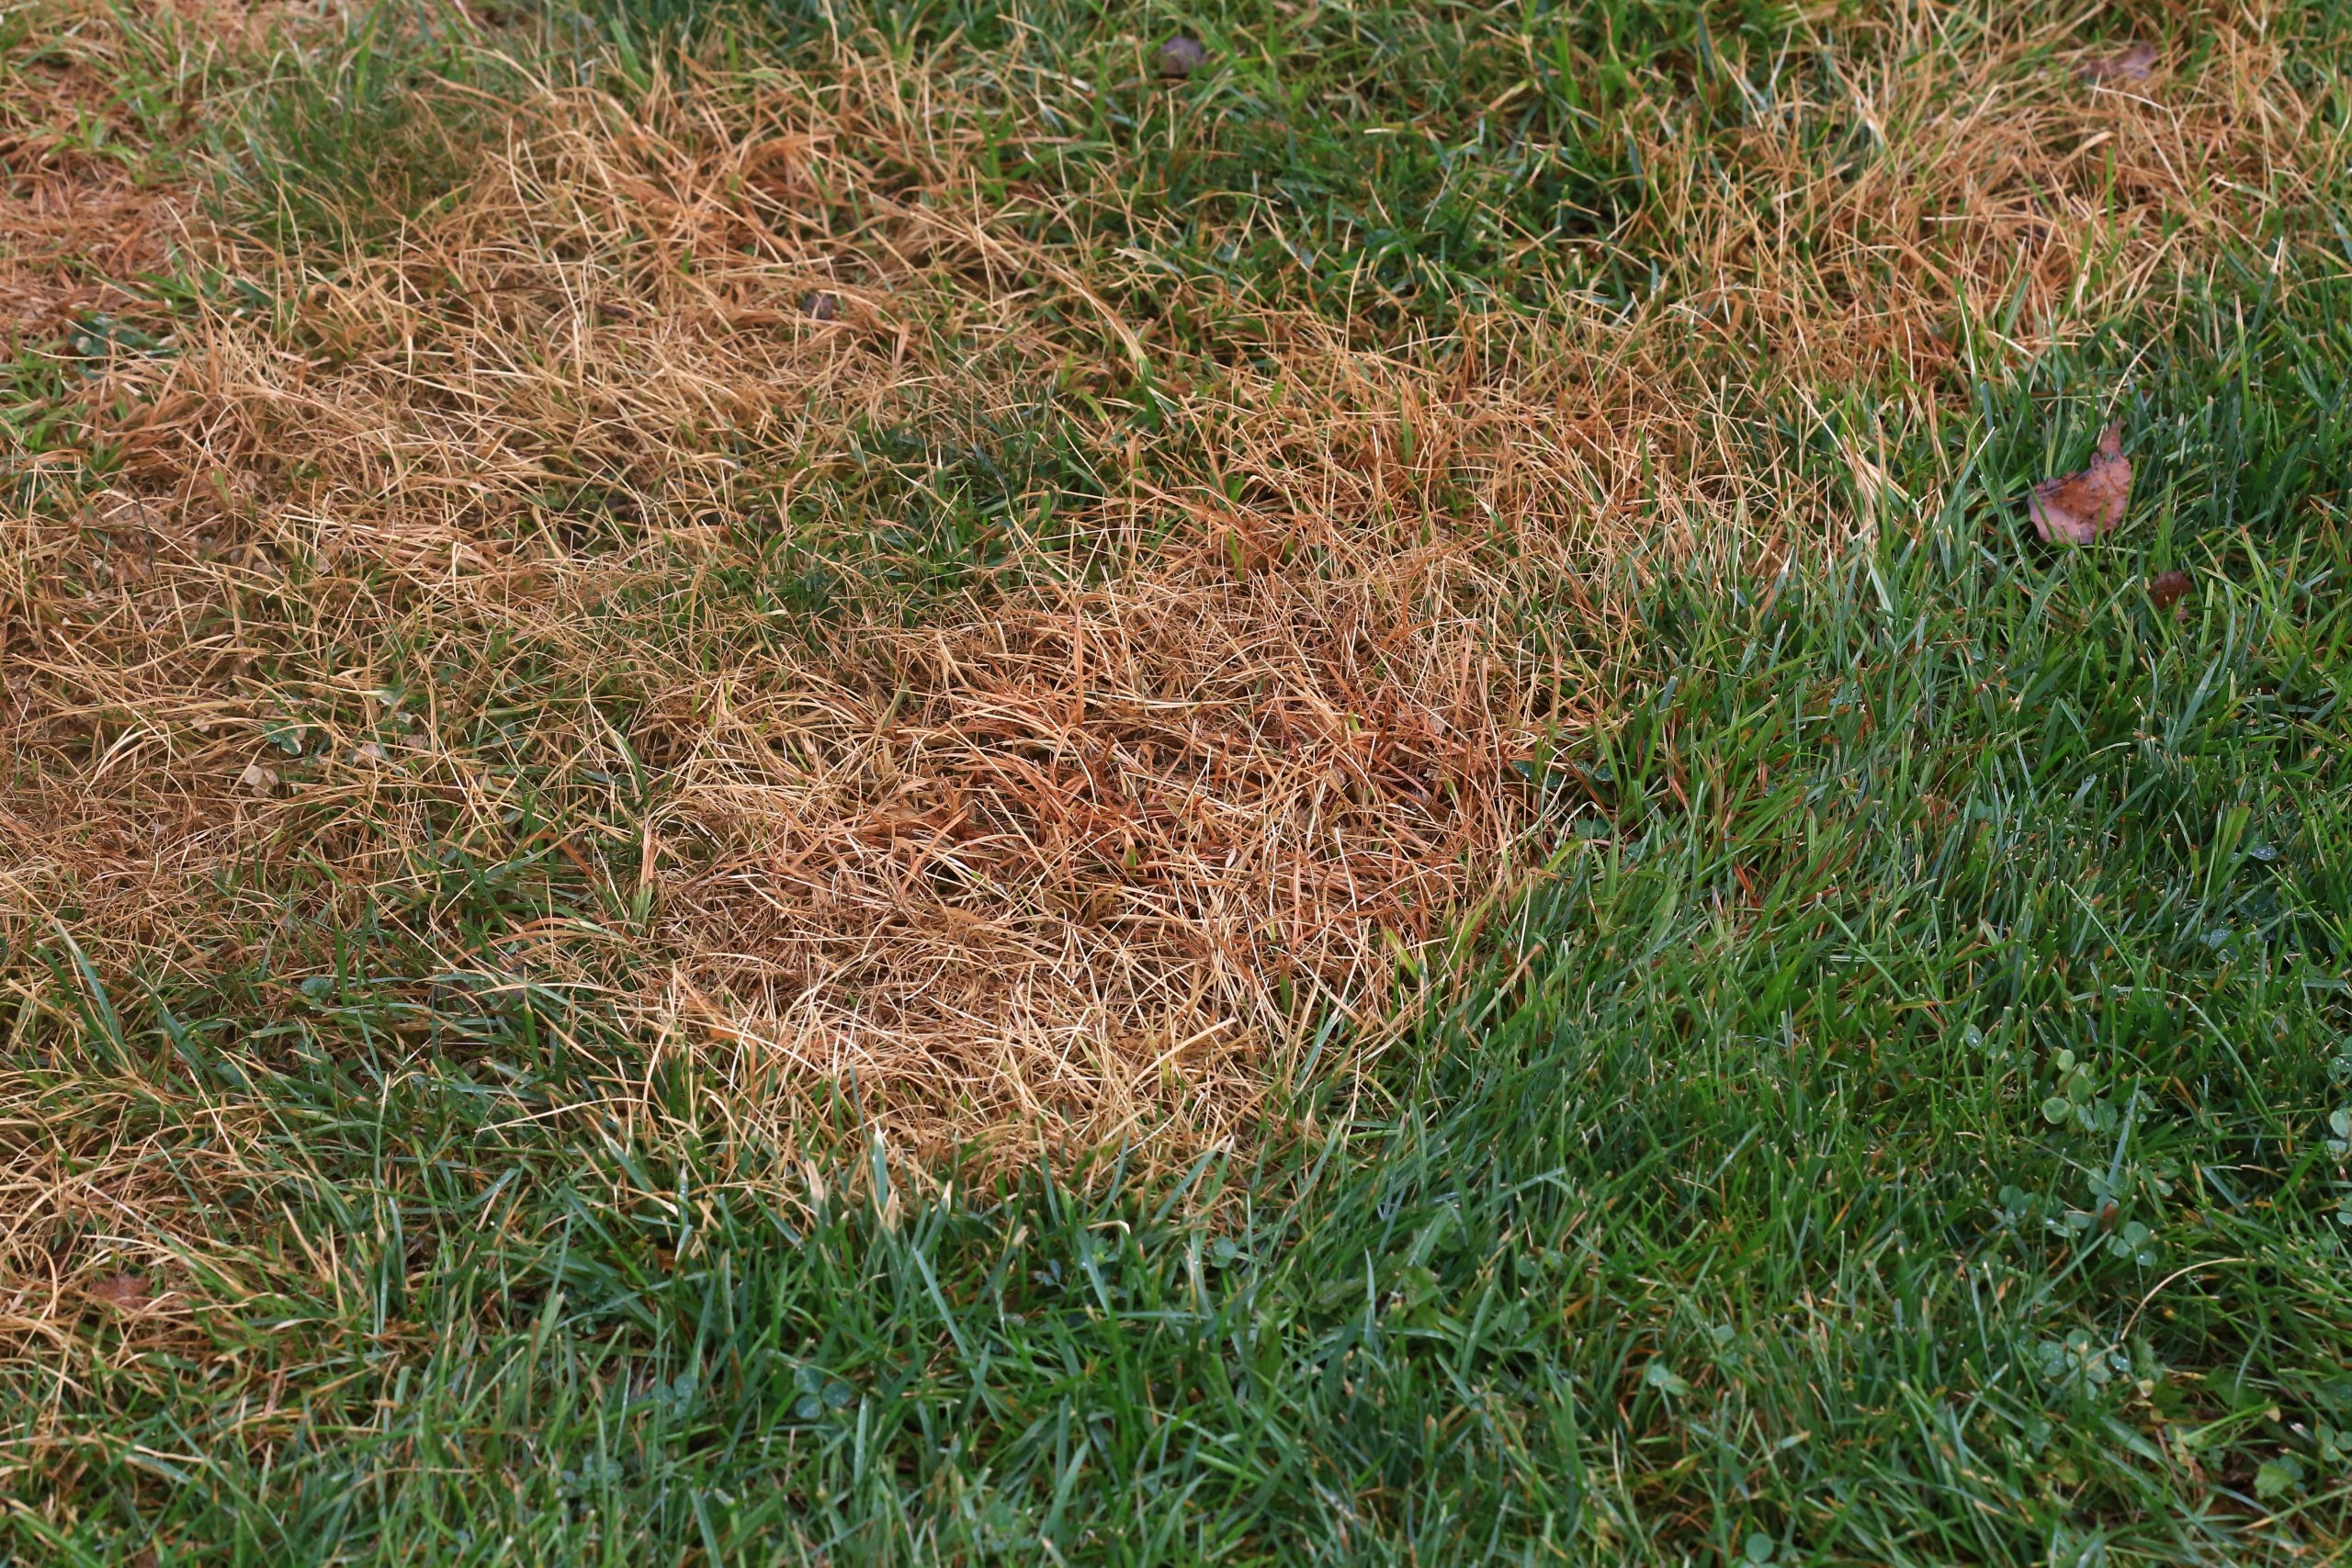 Why Are There Brown Spots In My Lawn?